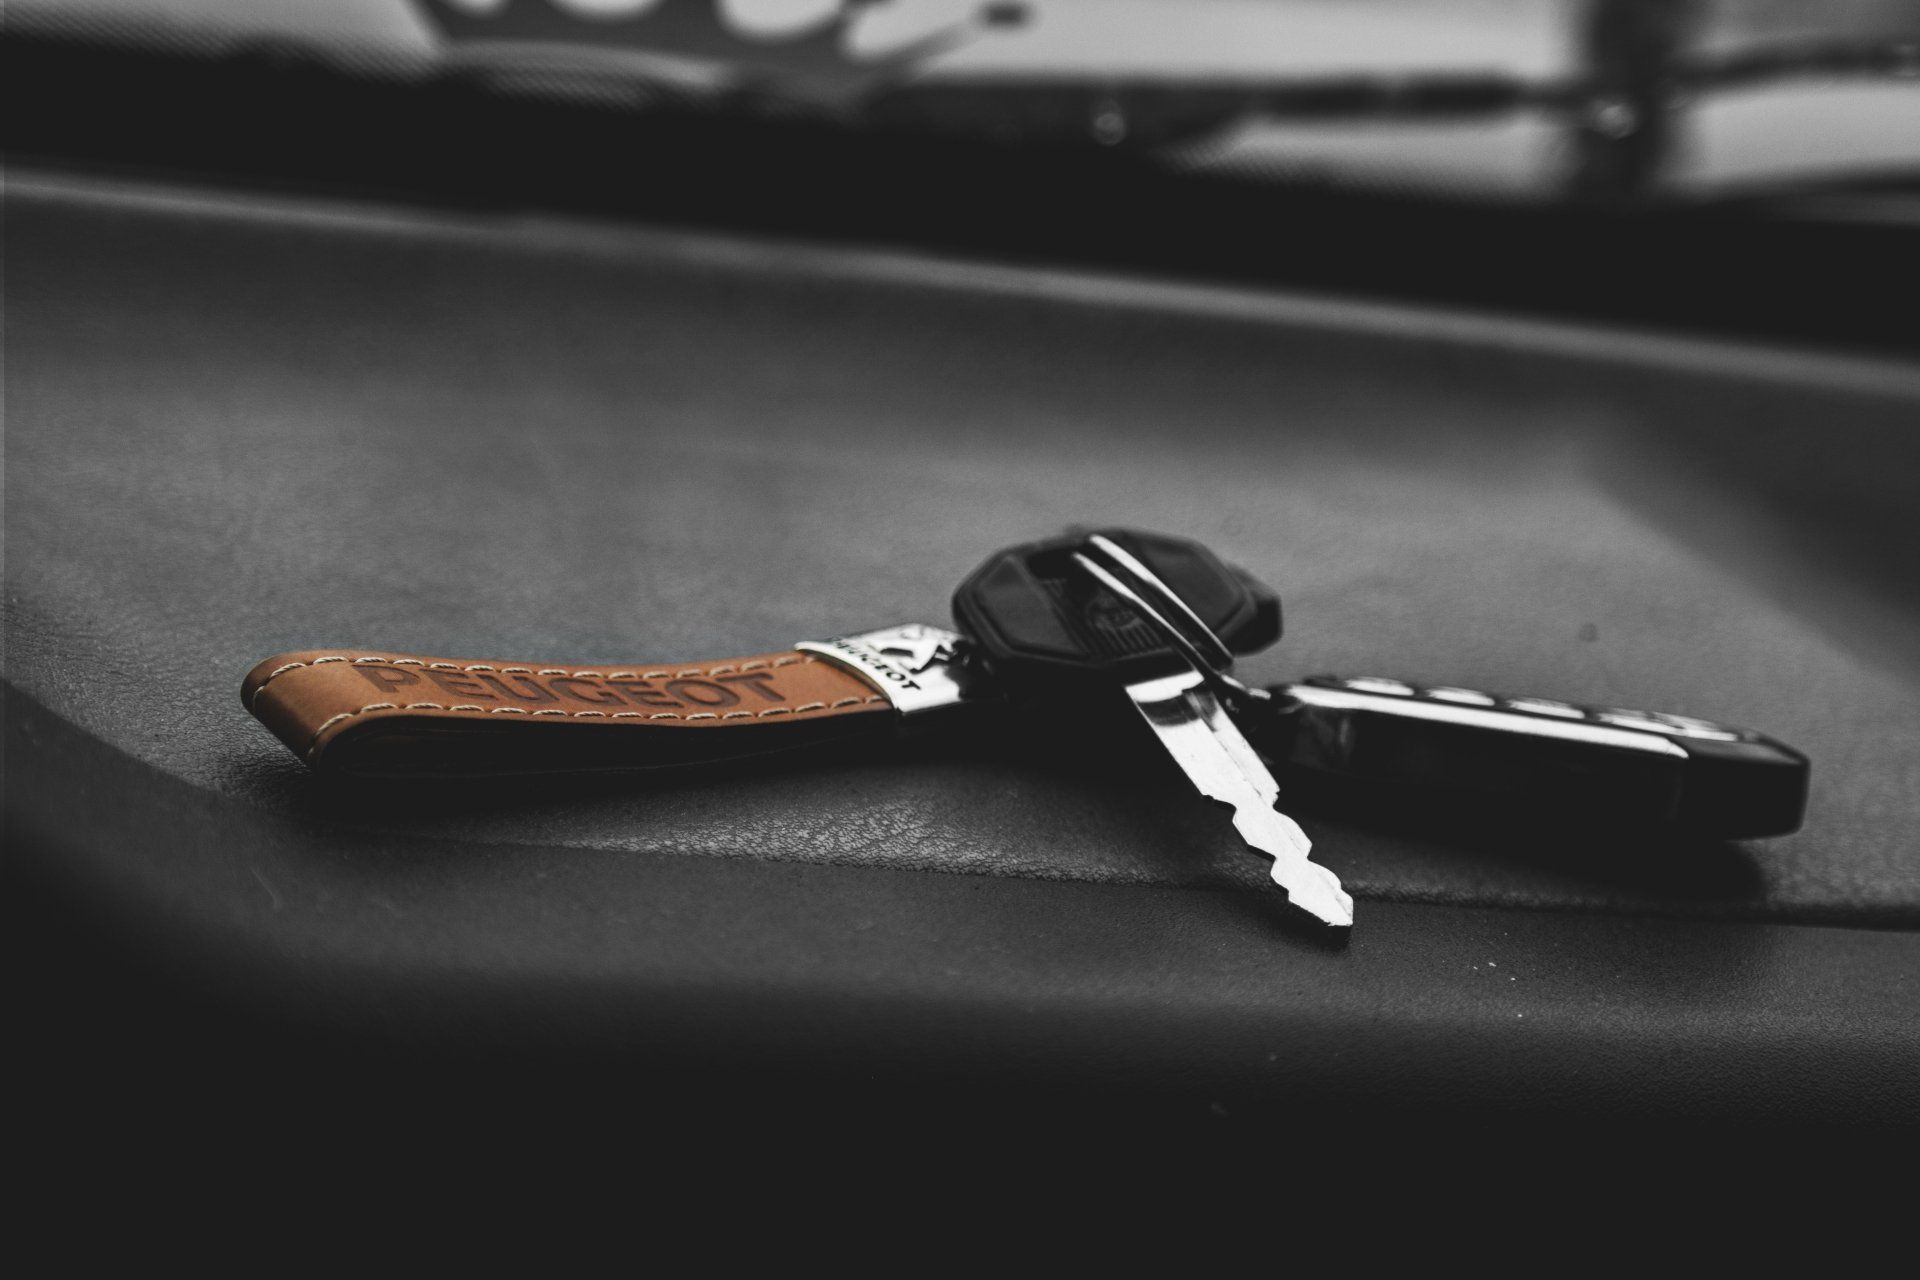 A pair of car keys laying on the dashboard of a car.